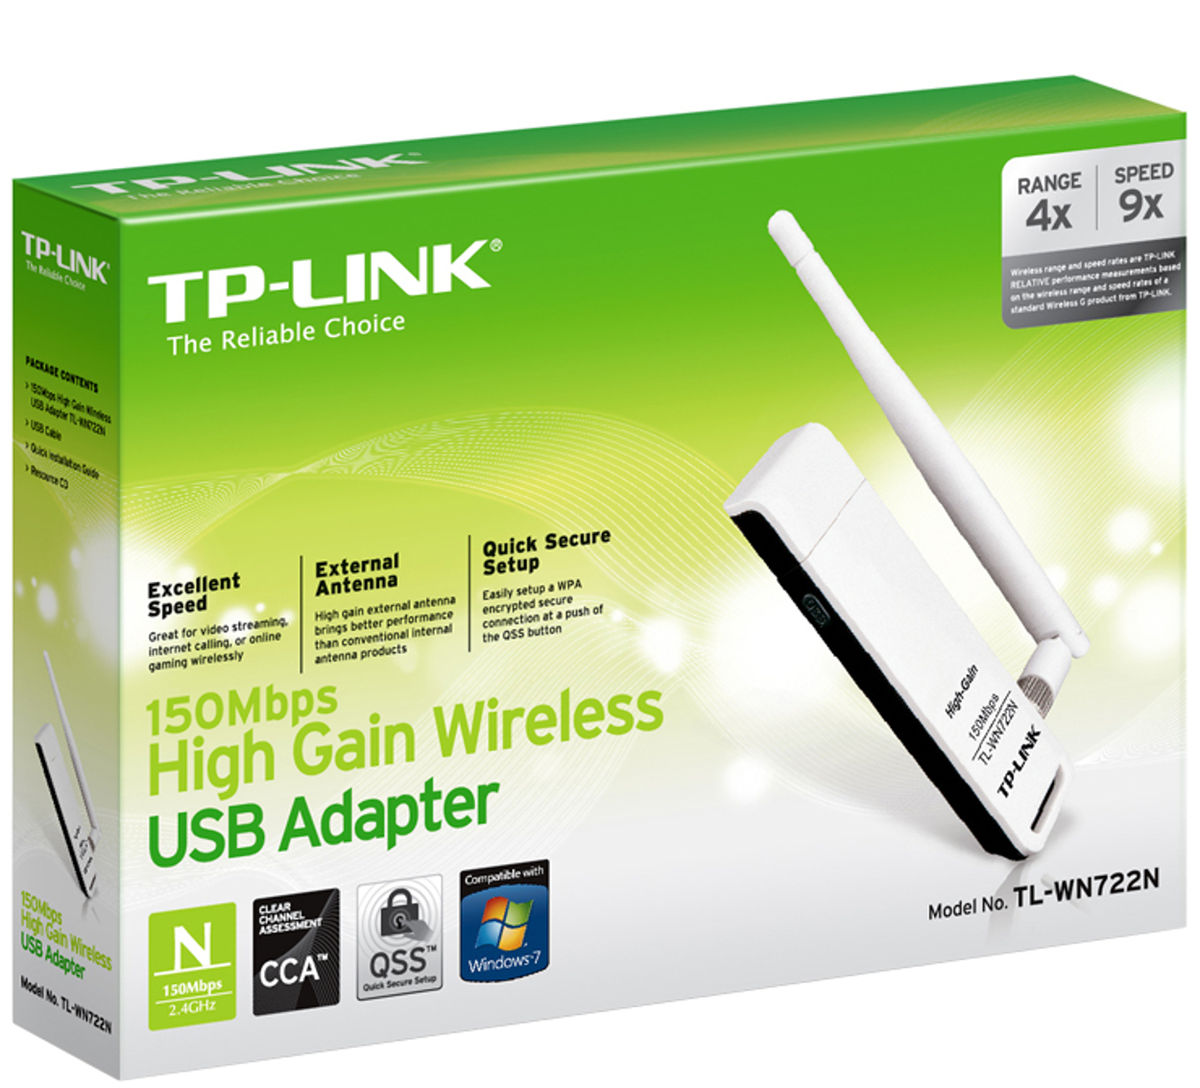 Tp link high. TP-link TL-wn781nd PCI Express. Wi-Fi адаптер TP-link TL-wn722n. Wi-Fi адаптер PCI-E TP-link TL-wn881nd. Wi-Fi адаптер TP-link TL-wn821n.